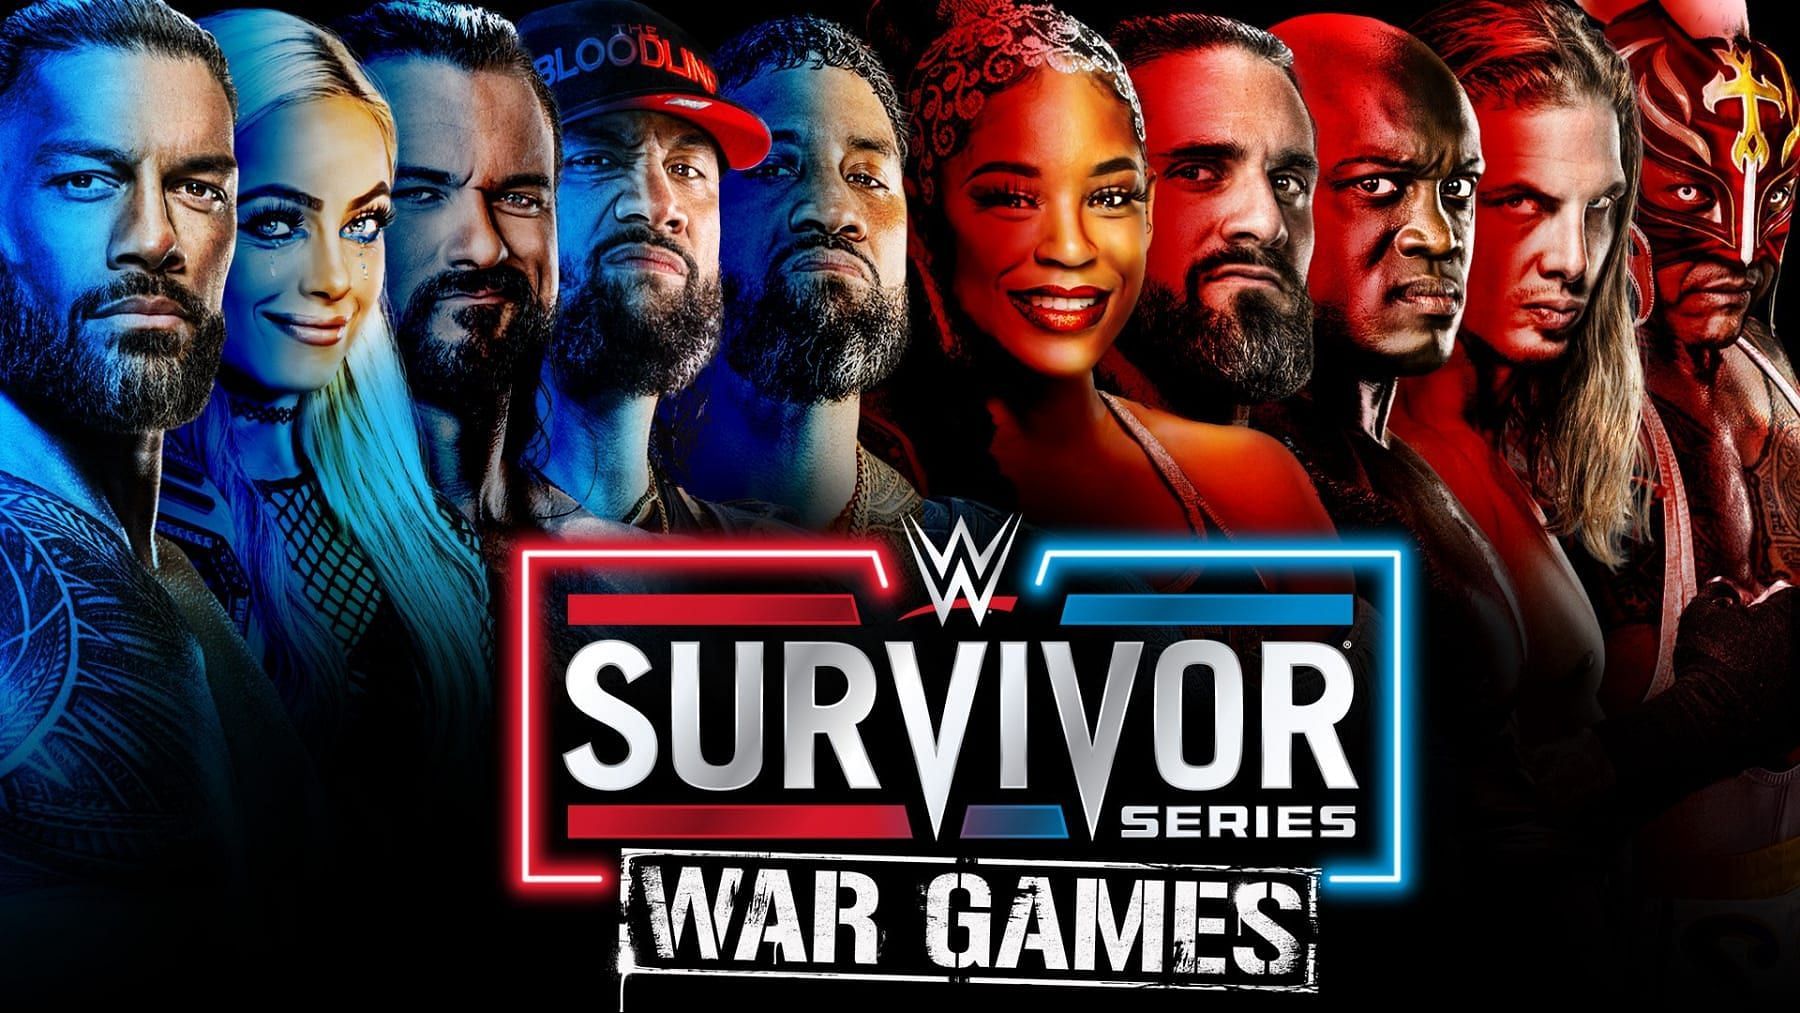 WWE Survivor Series War Games Takes Place on Saturday, November 26th